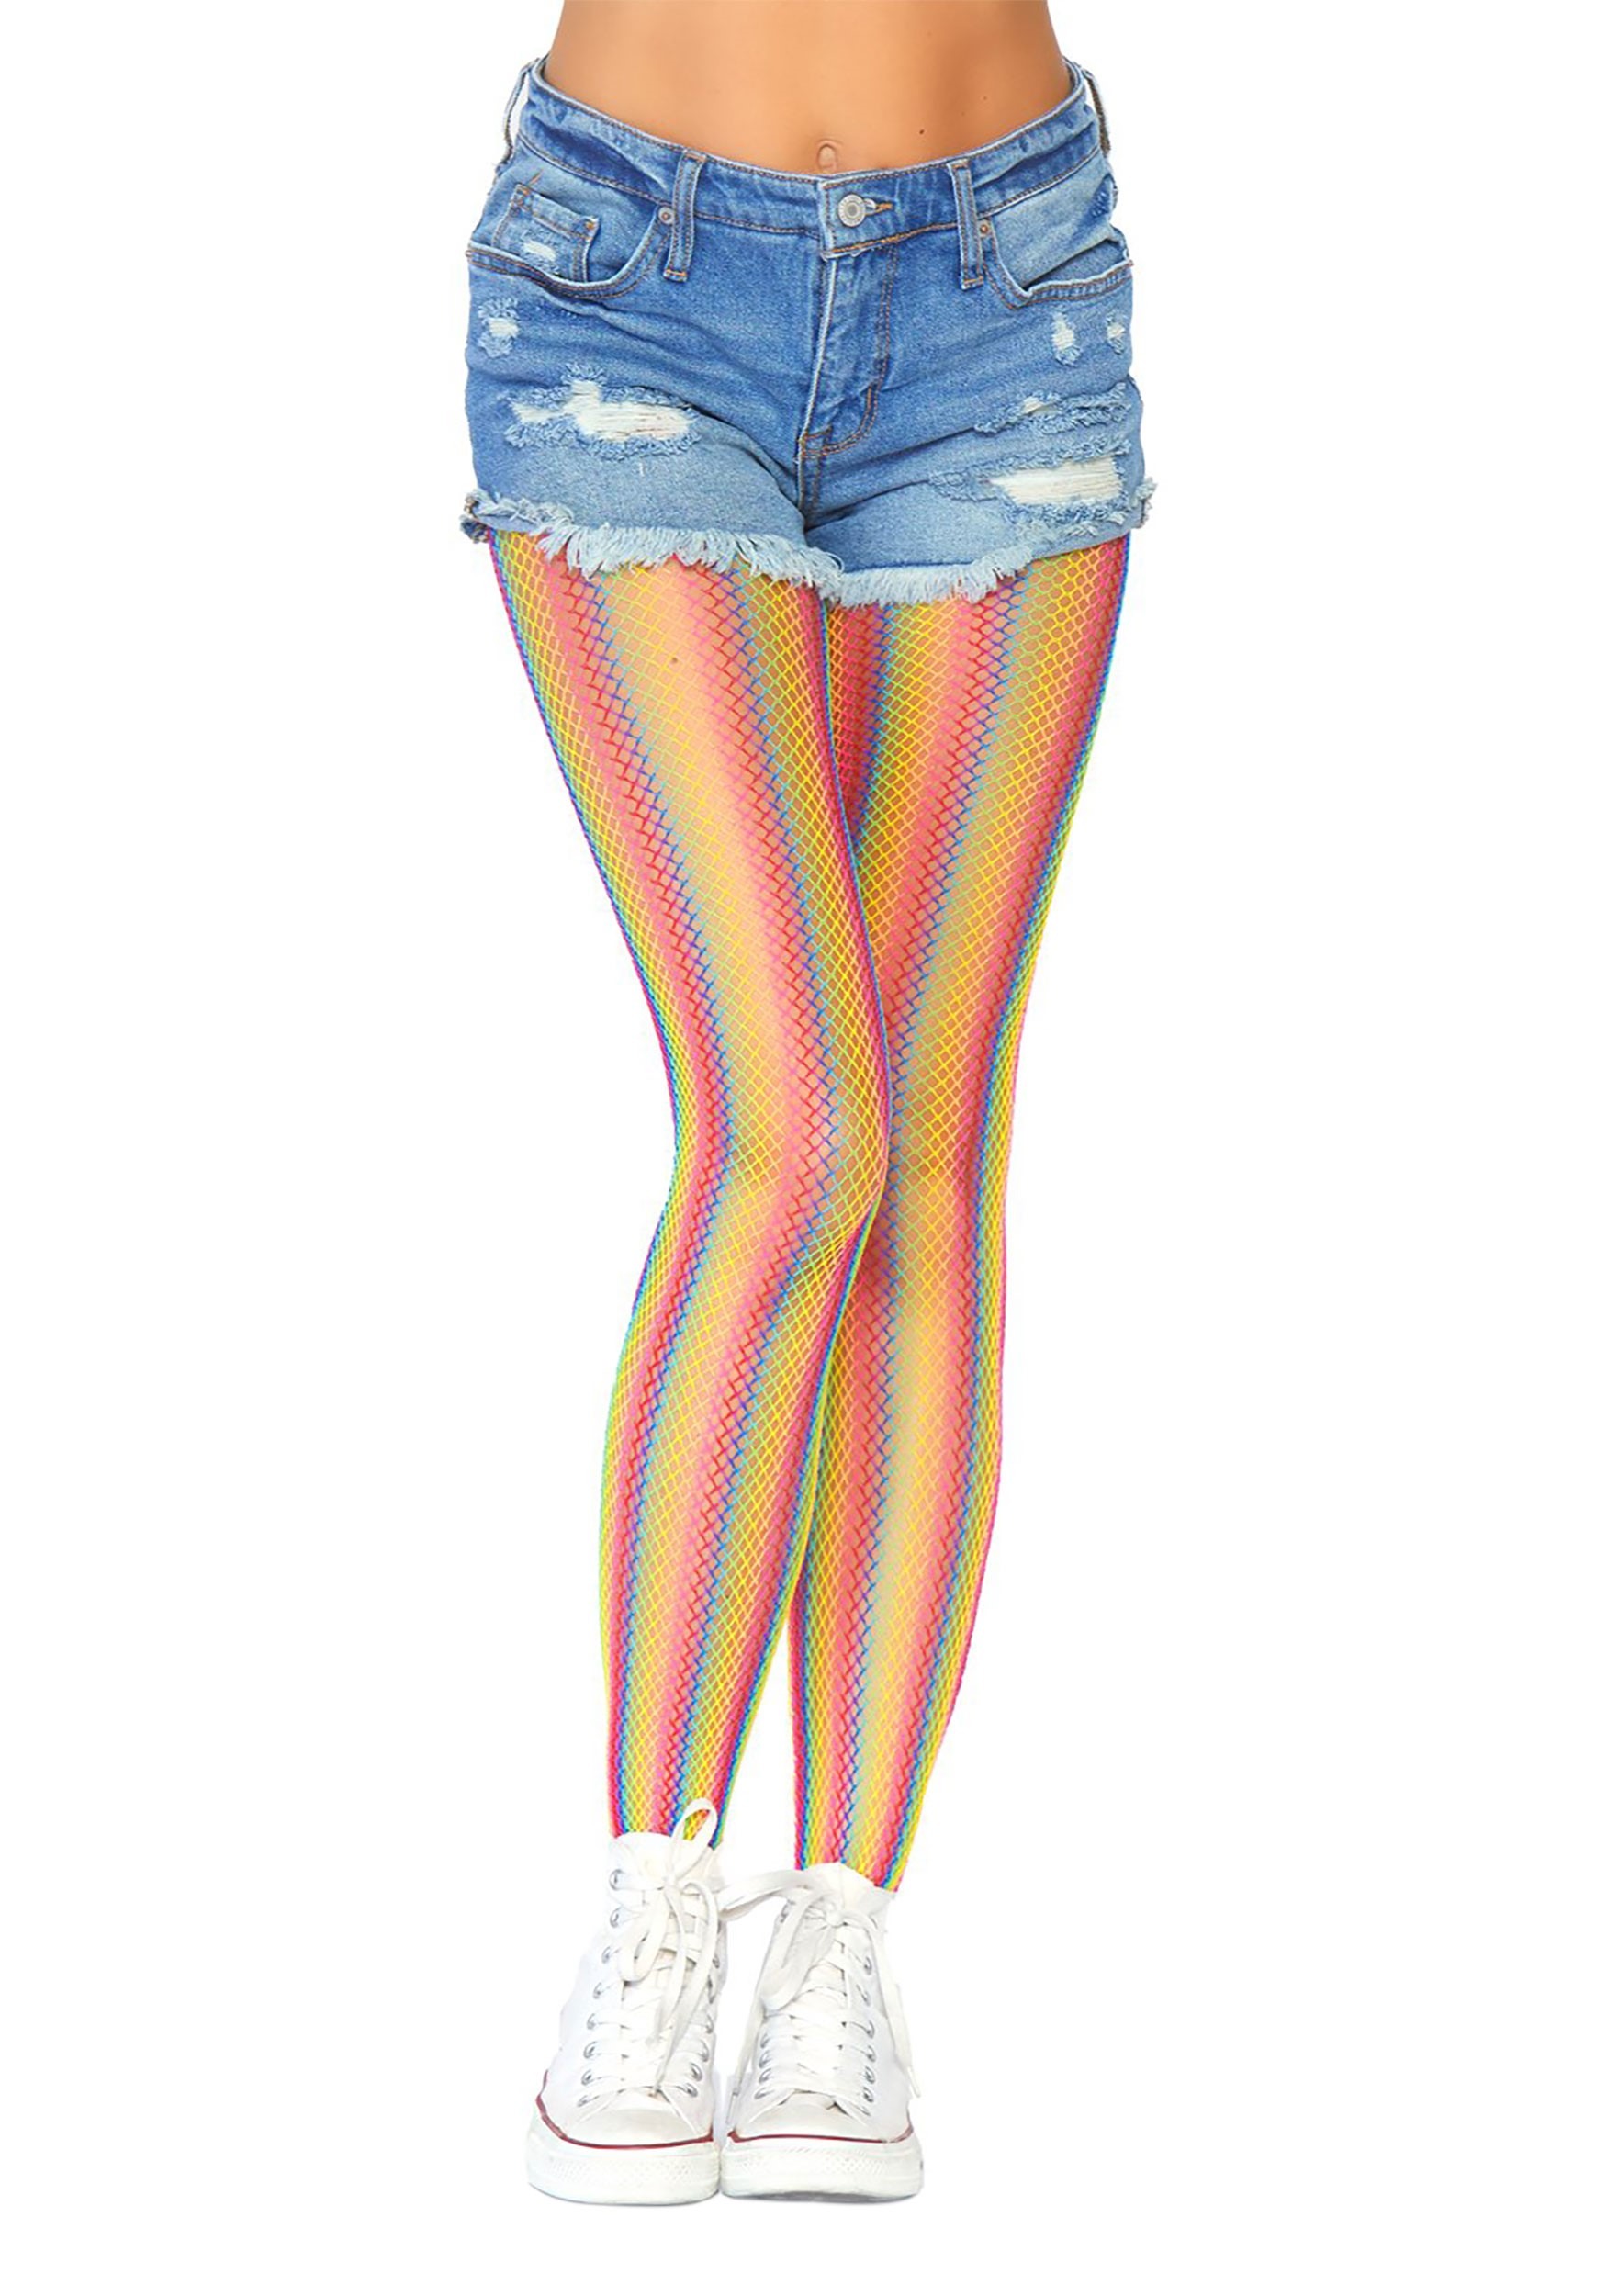 Rainbow Striped Tights for Women